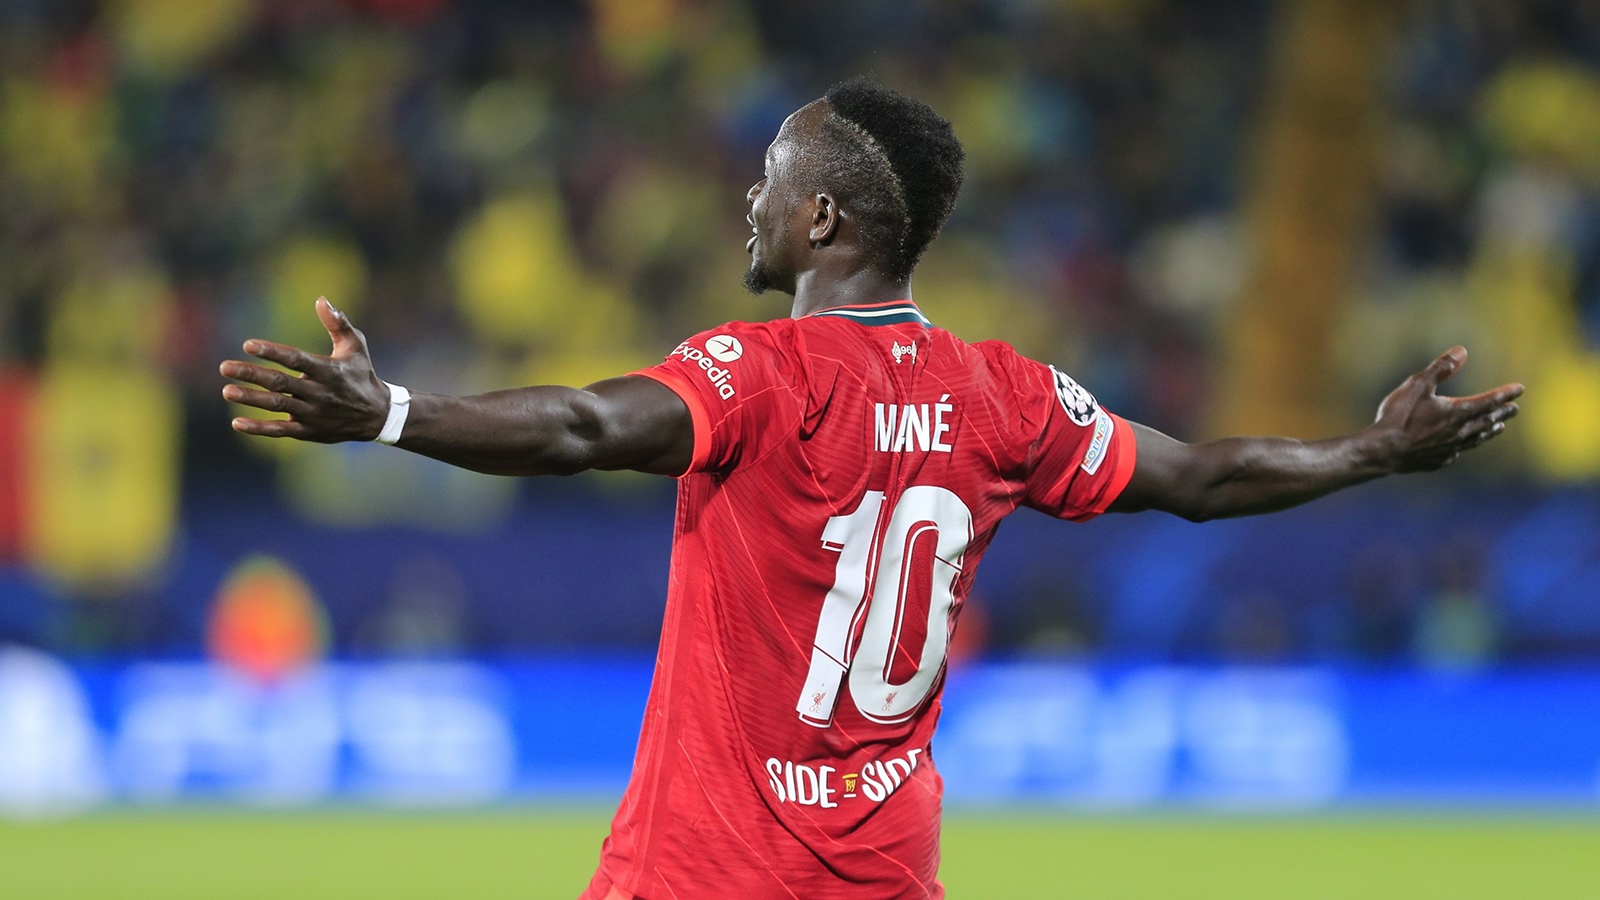 Liverpool are asking for more than மில்லியன் 25 million to leave Sadio Mane